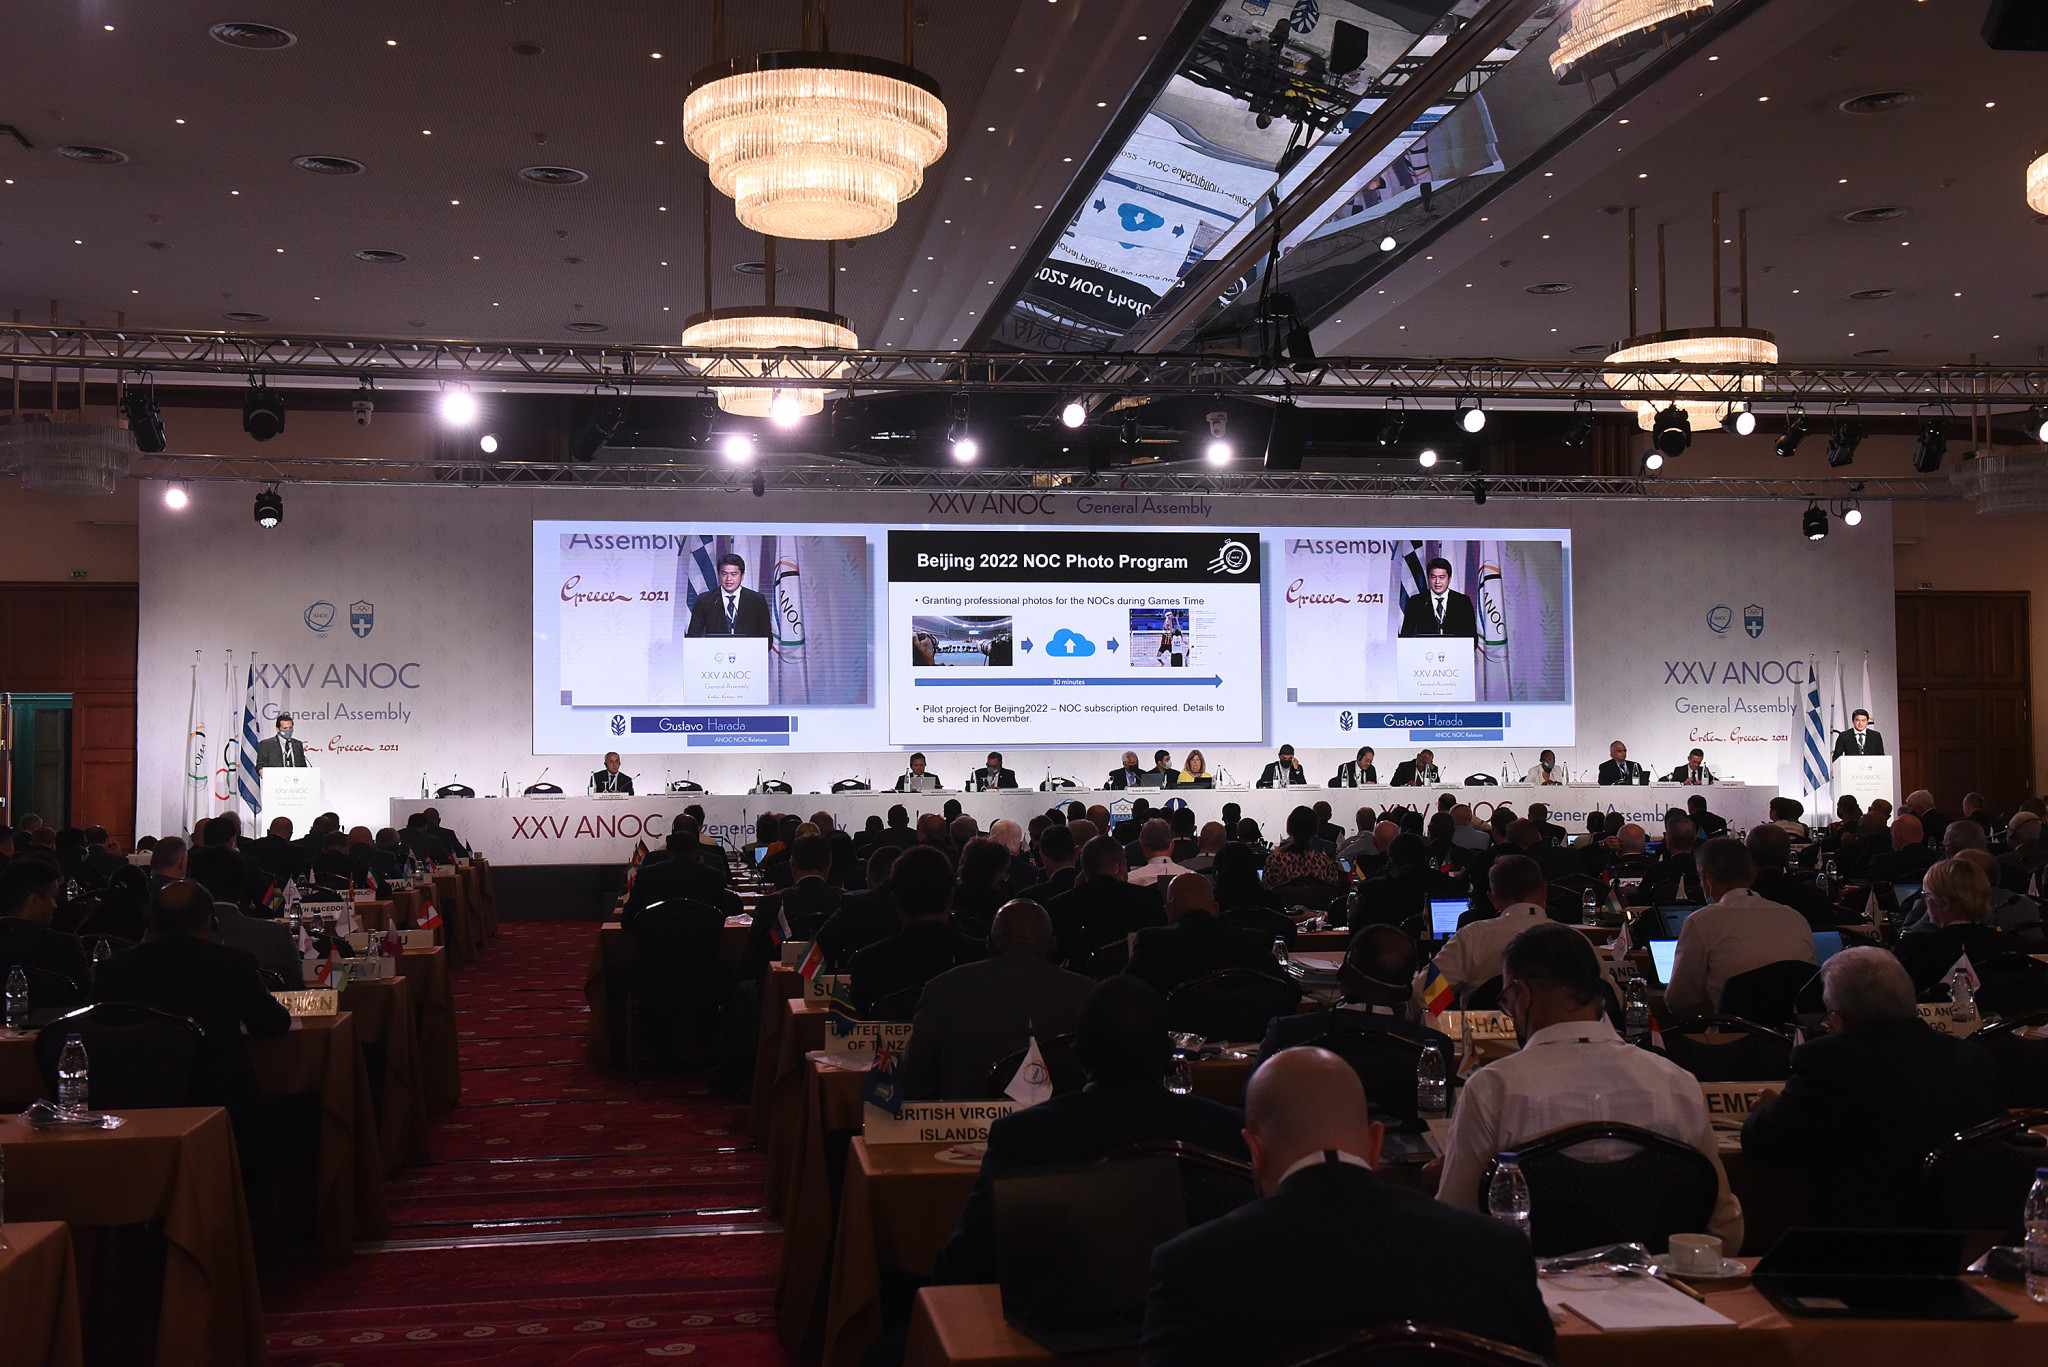 ANOC announced Seoul will host its General Assembly in 2022 ©ANOC